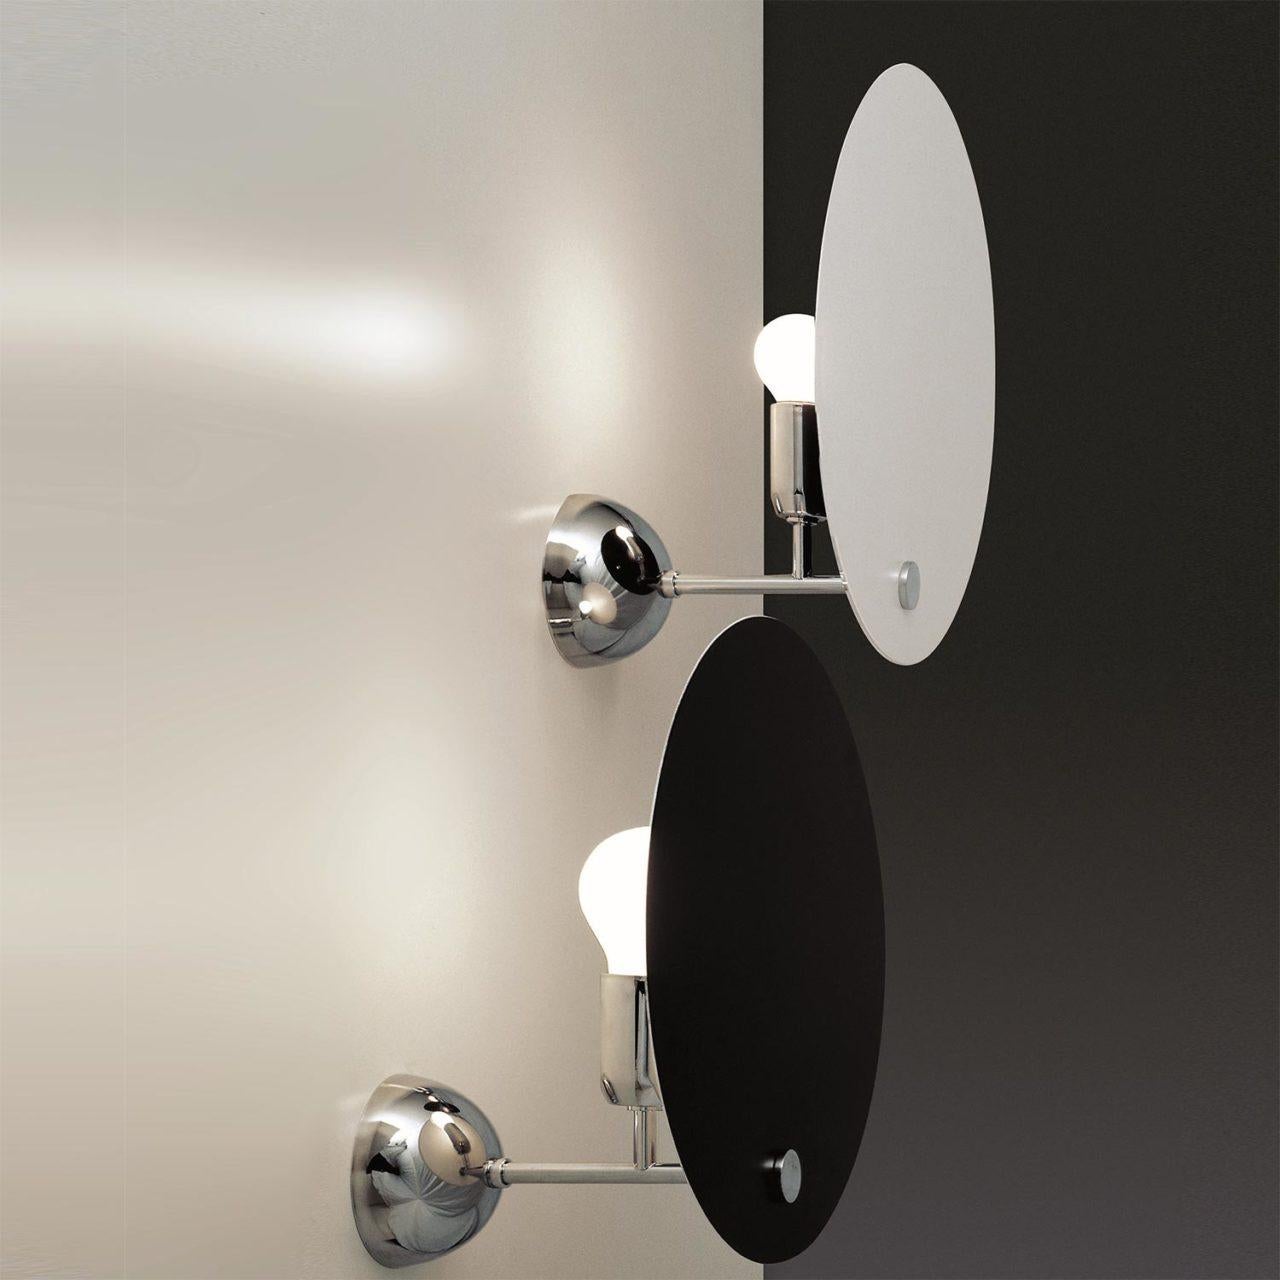 Vico Magistretti 'Kuta' wall lamp for Nemo in black.

A wall lamp originally designed in the 1970's by renowned Italian designed Vico Magistretti, the Kuta features a circular reflector executed in aluminum.  This clever design, featuring a circular